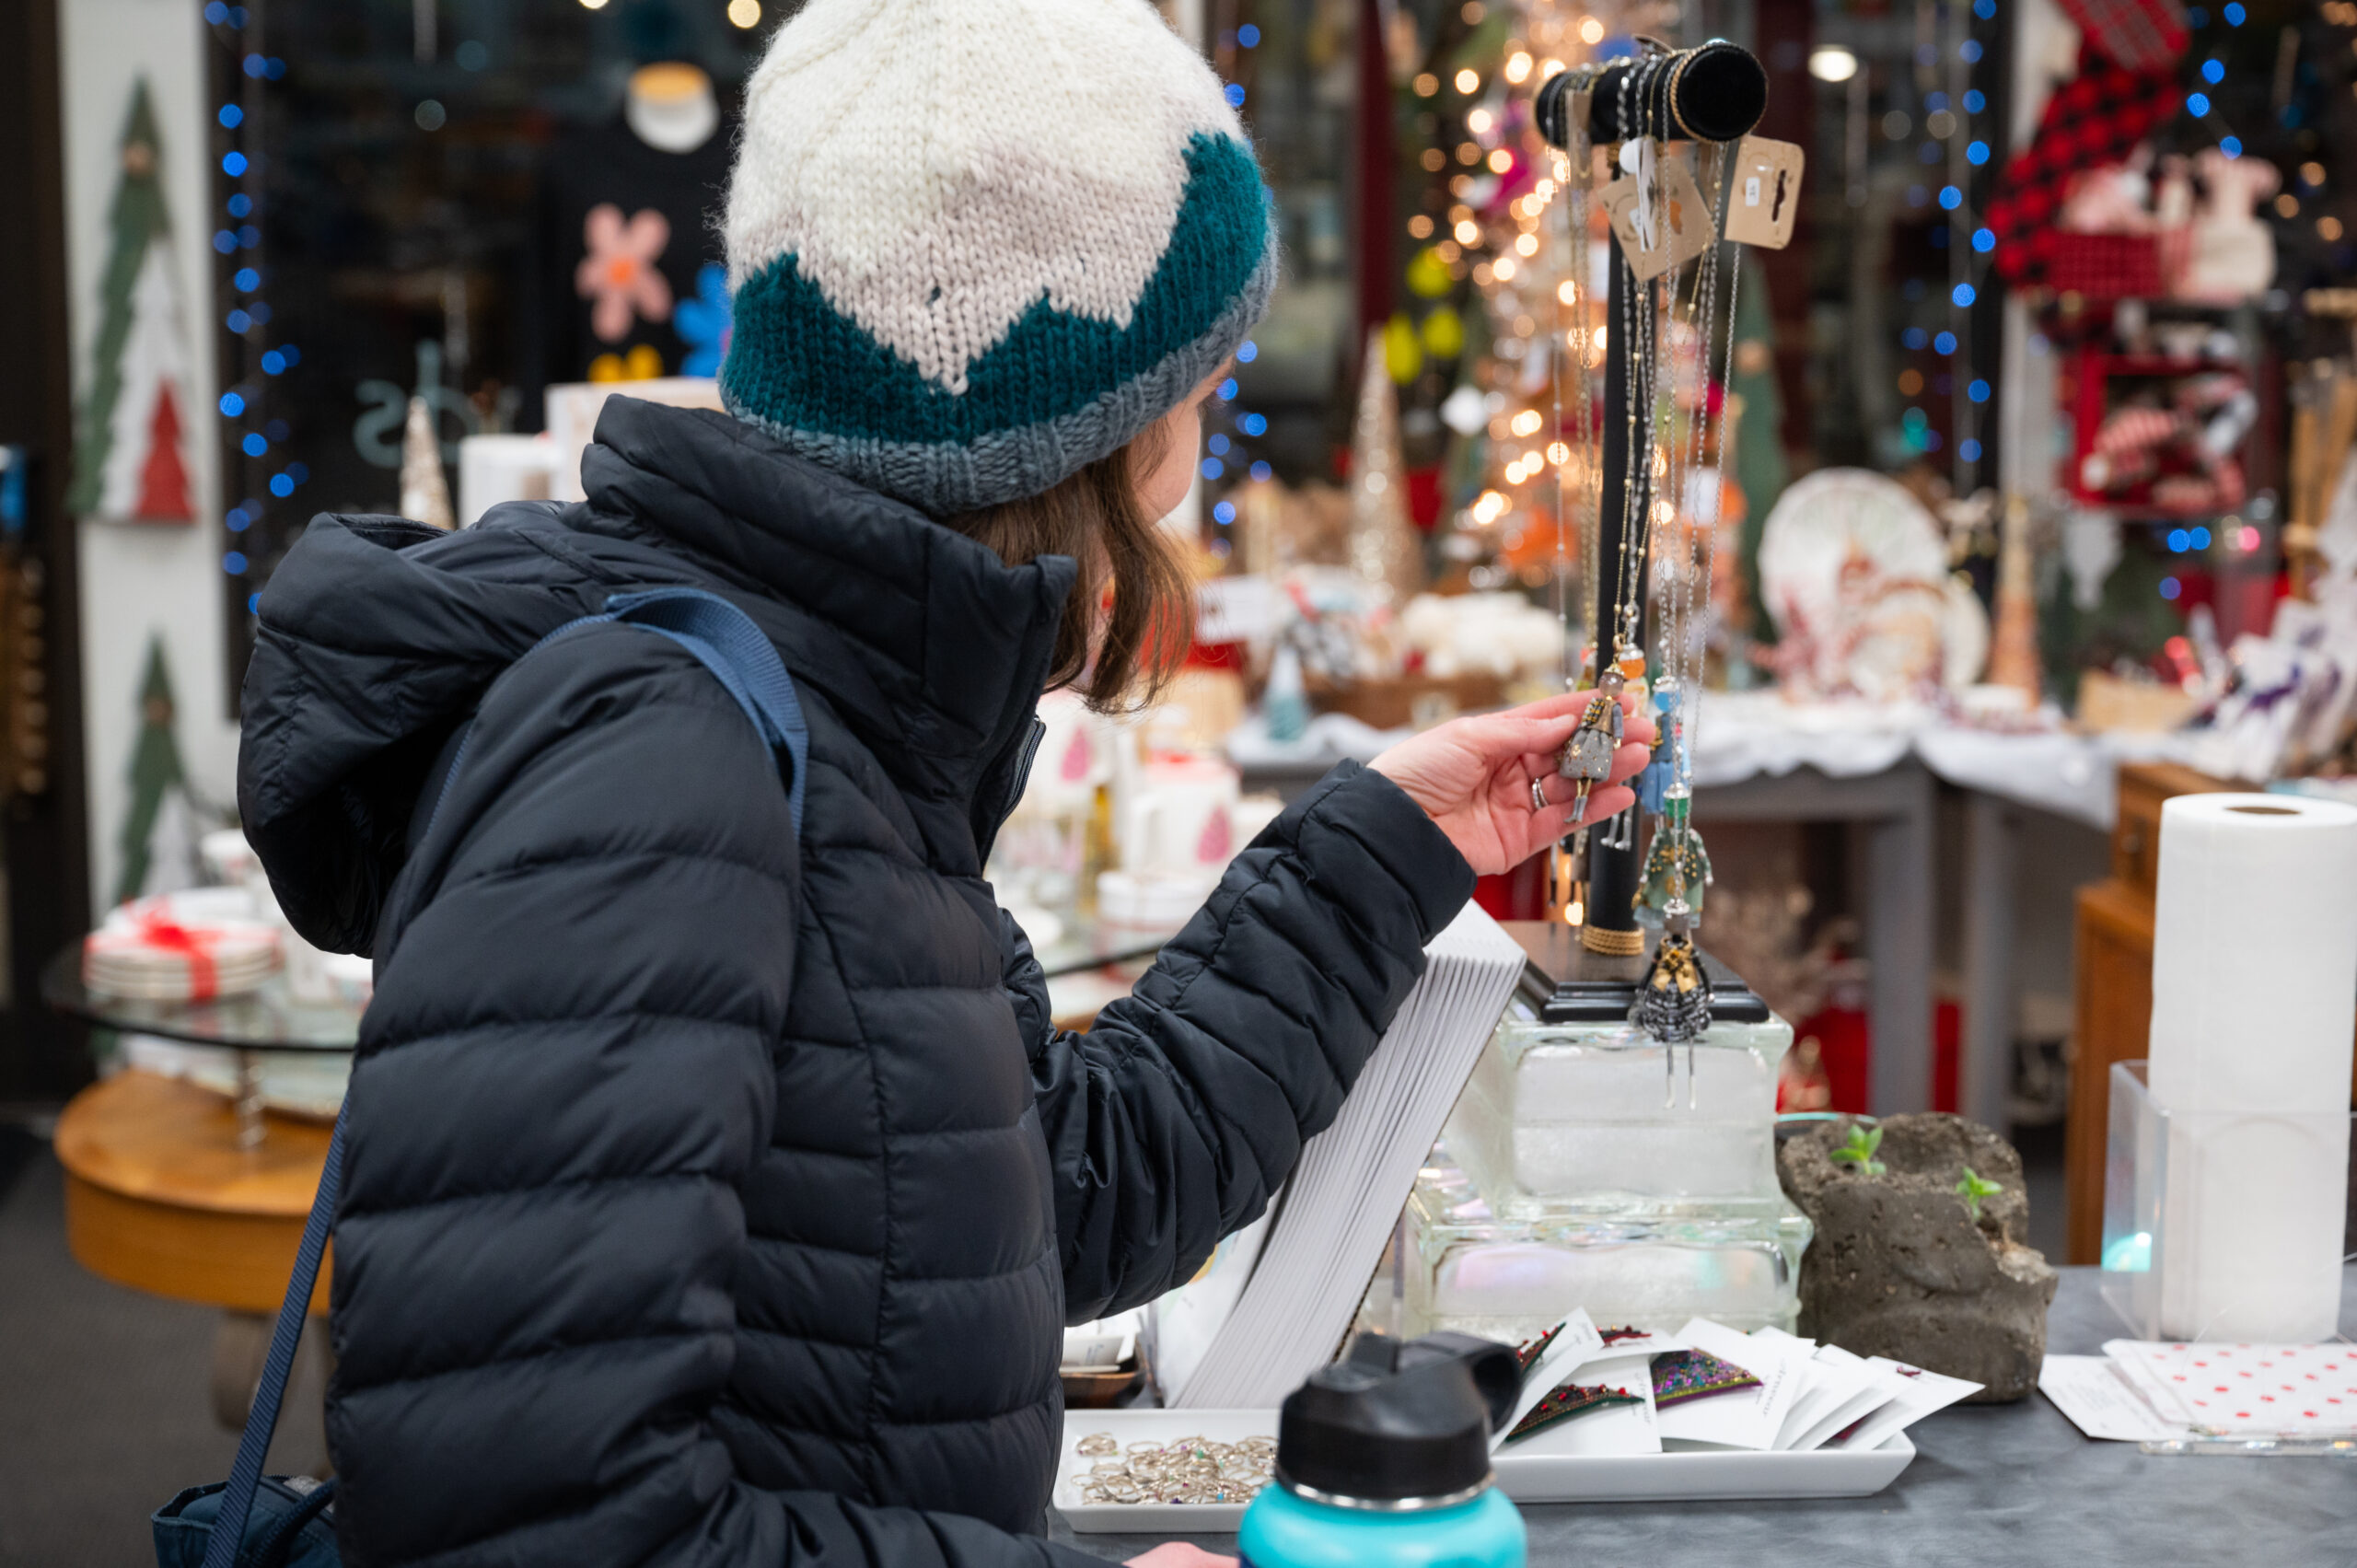 A person wearing a knitted beanie examines jewelery.